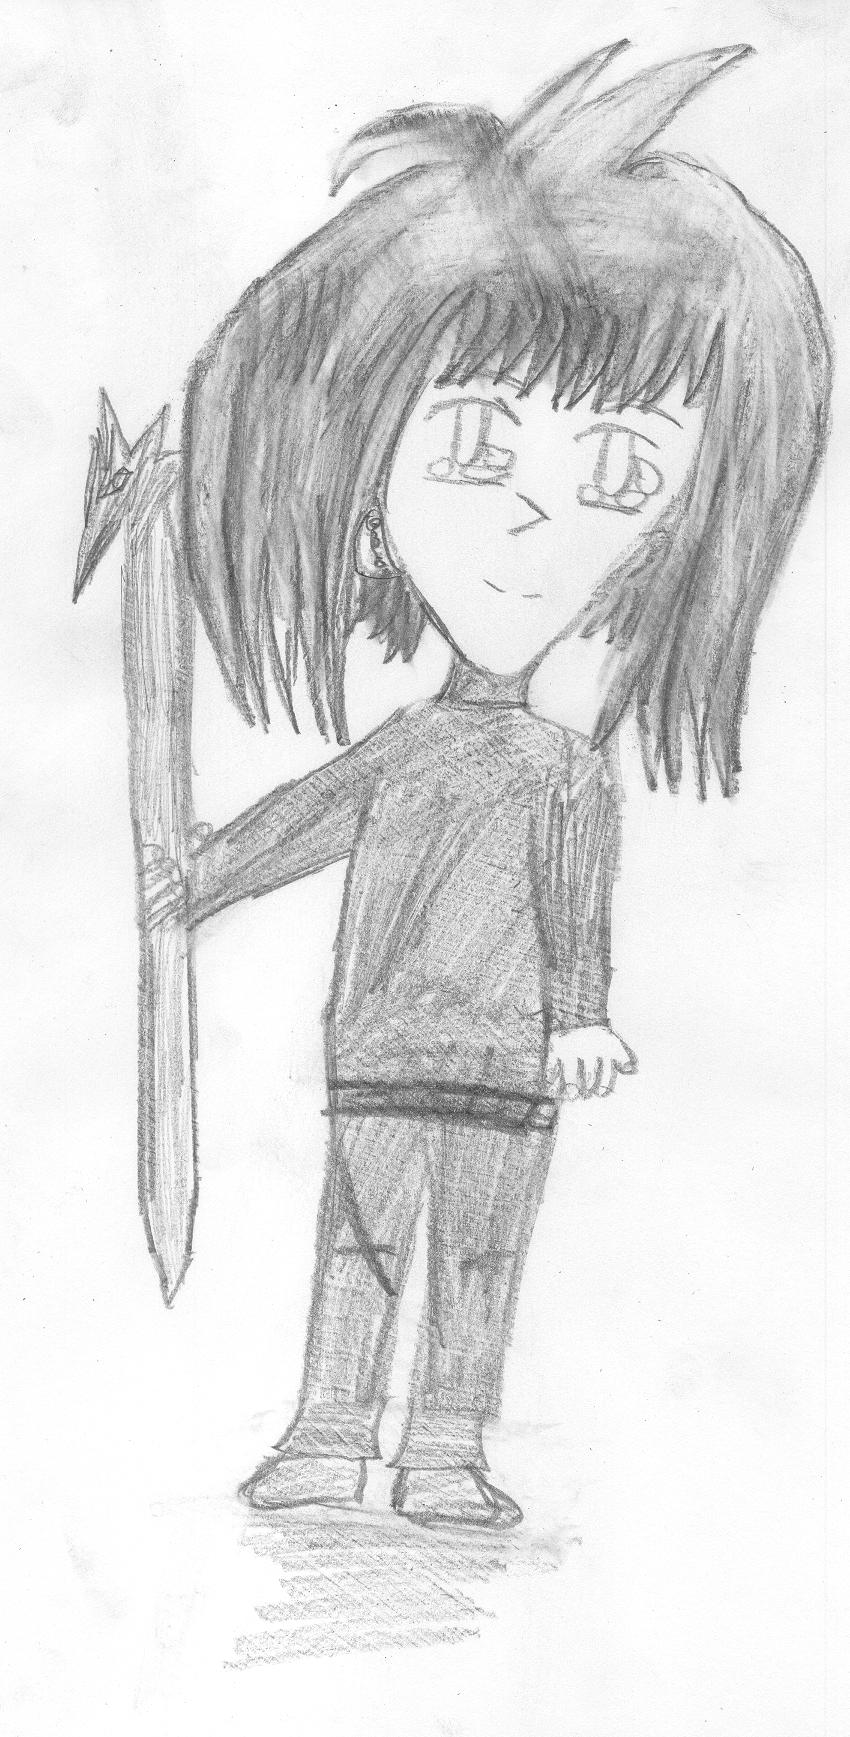 Karo with his wand by Chila